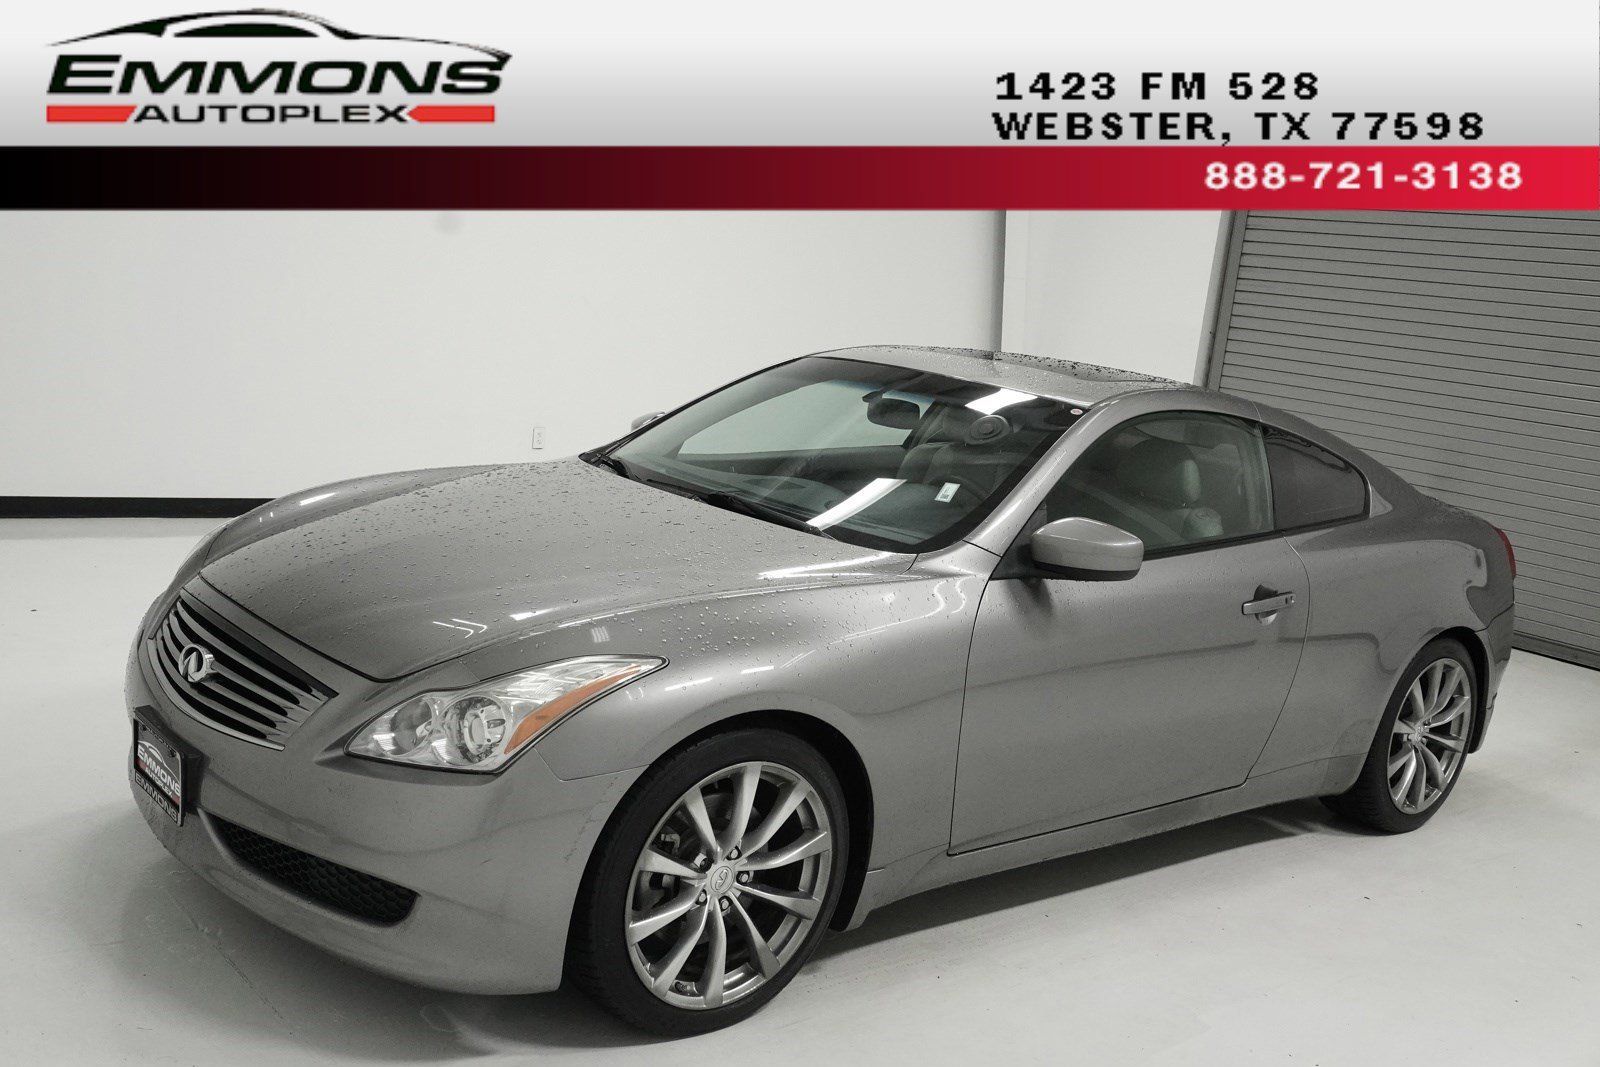 Used 2008 Infiniti G37 Coupe